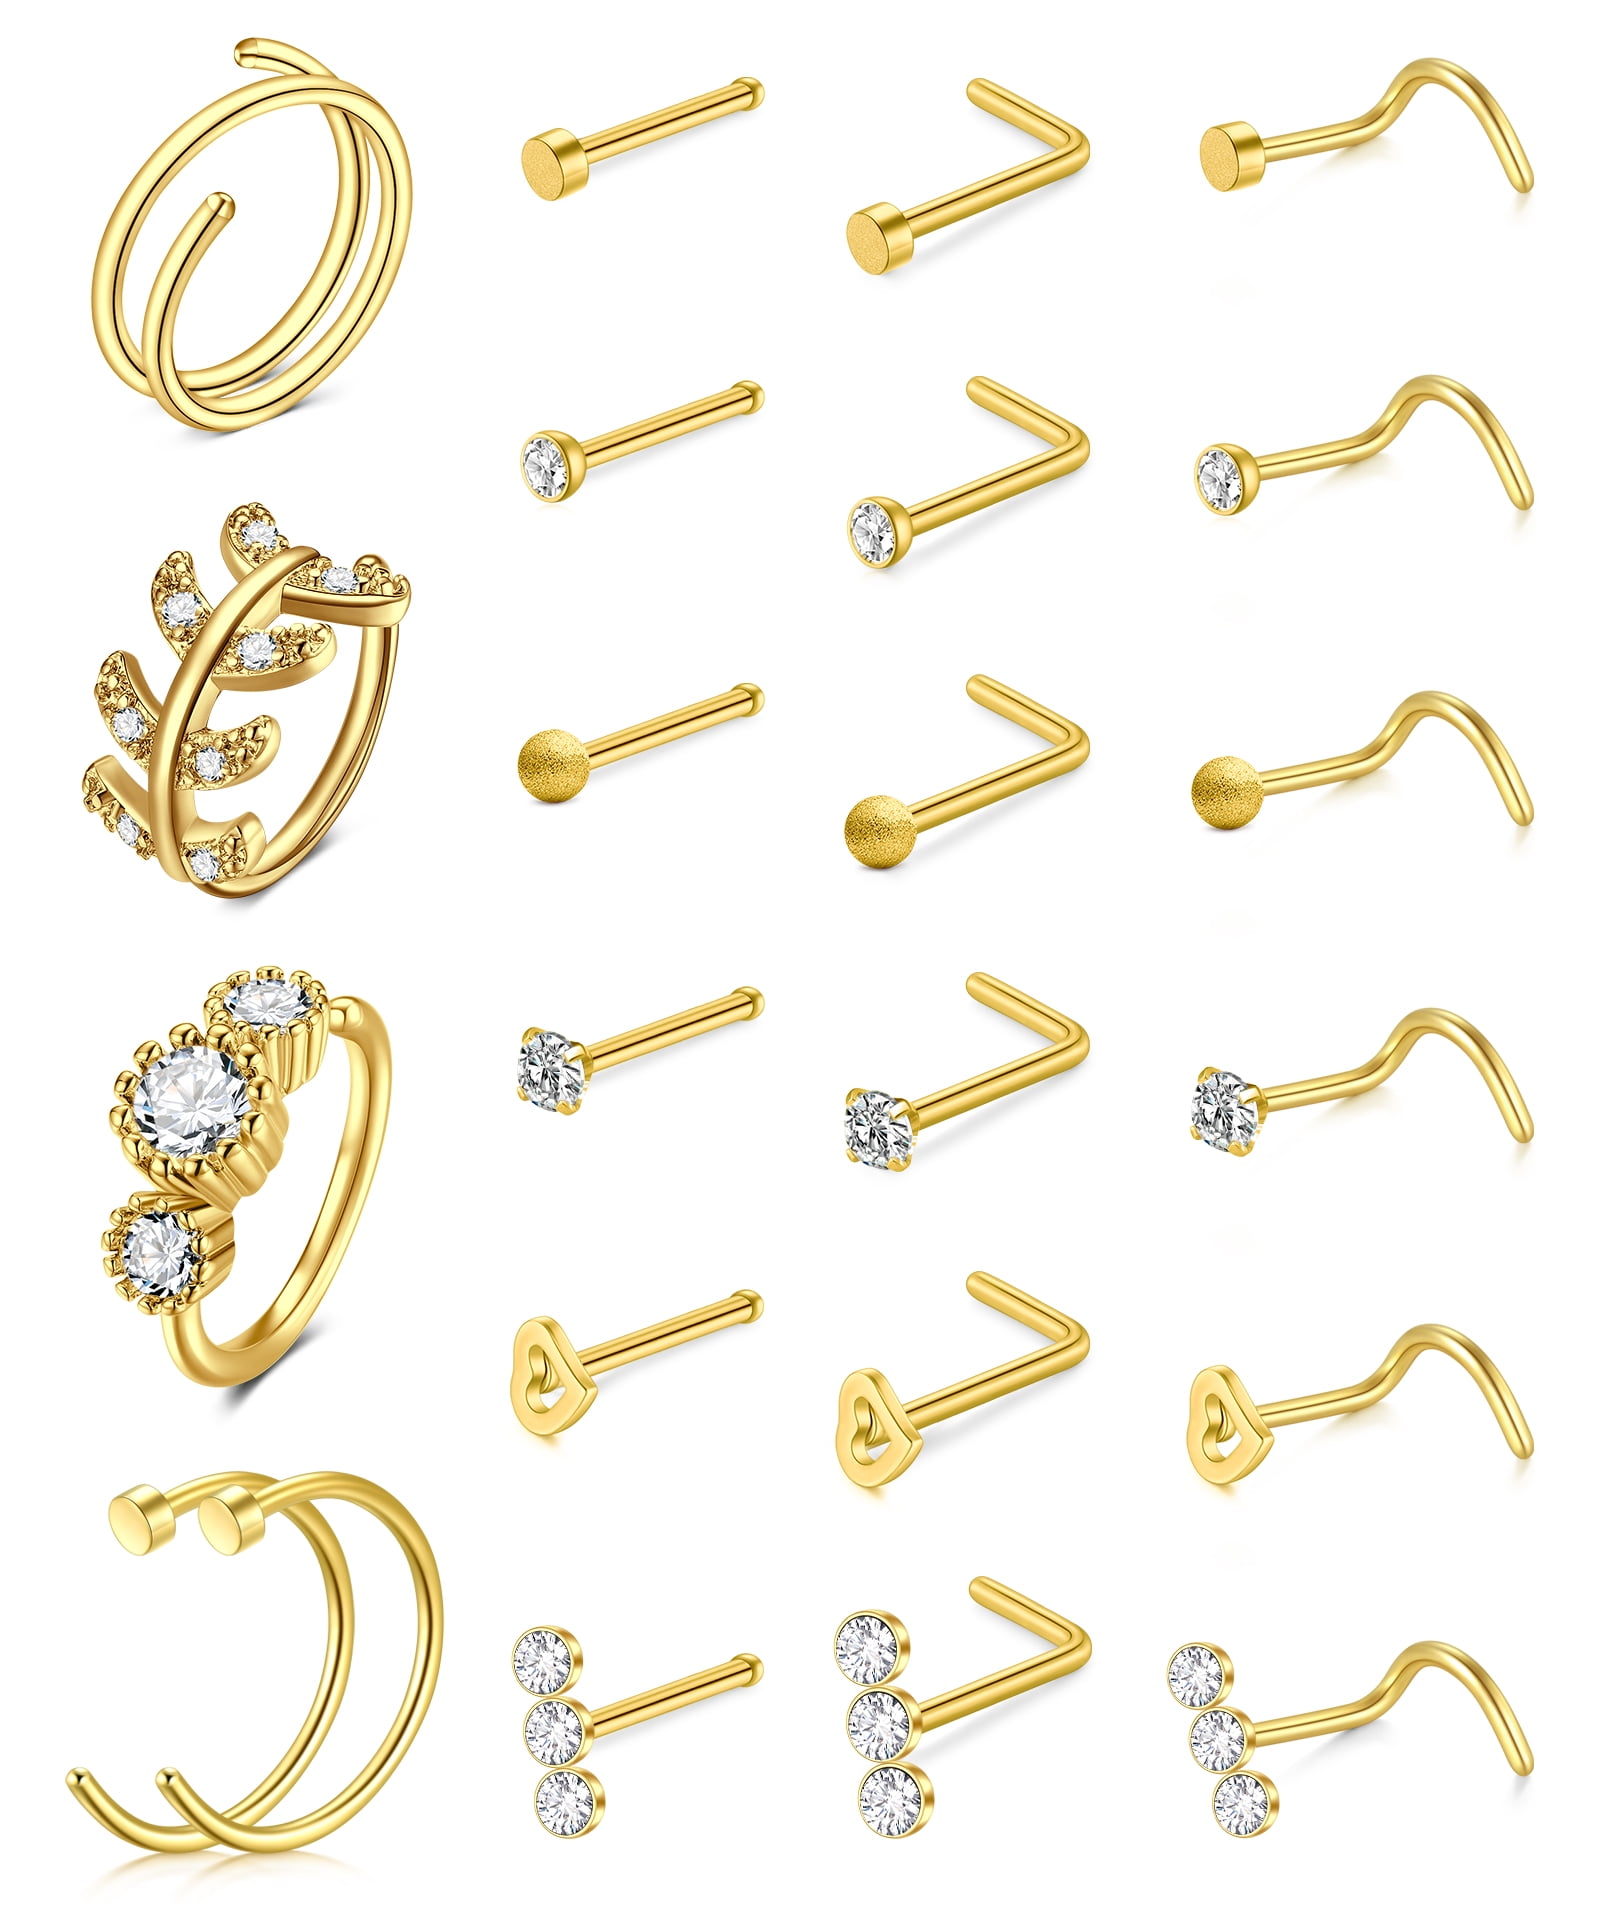  AllerPierce 20G Gold Nose Rings Sets Bone Screw L Shaped Nose  Studs Tragus Cartilage Nose Ring Hoop Stainless Steel Nose Piercing Jewelry  for Women Men : Clothing, Shoes & Jewelry